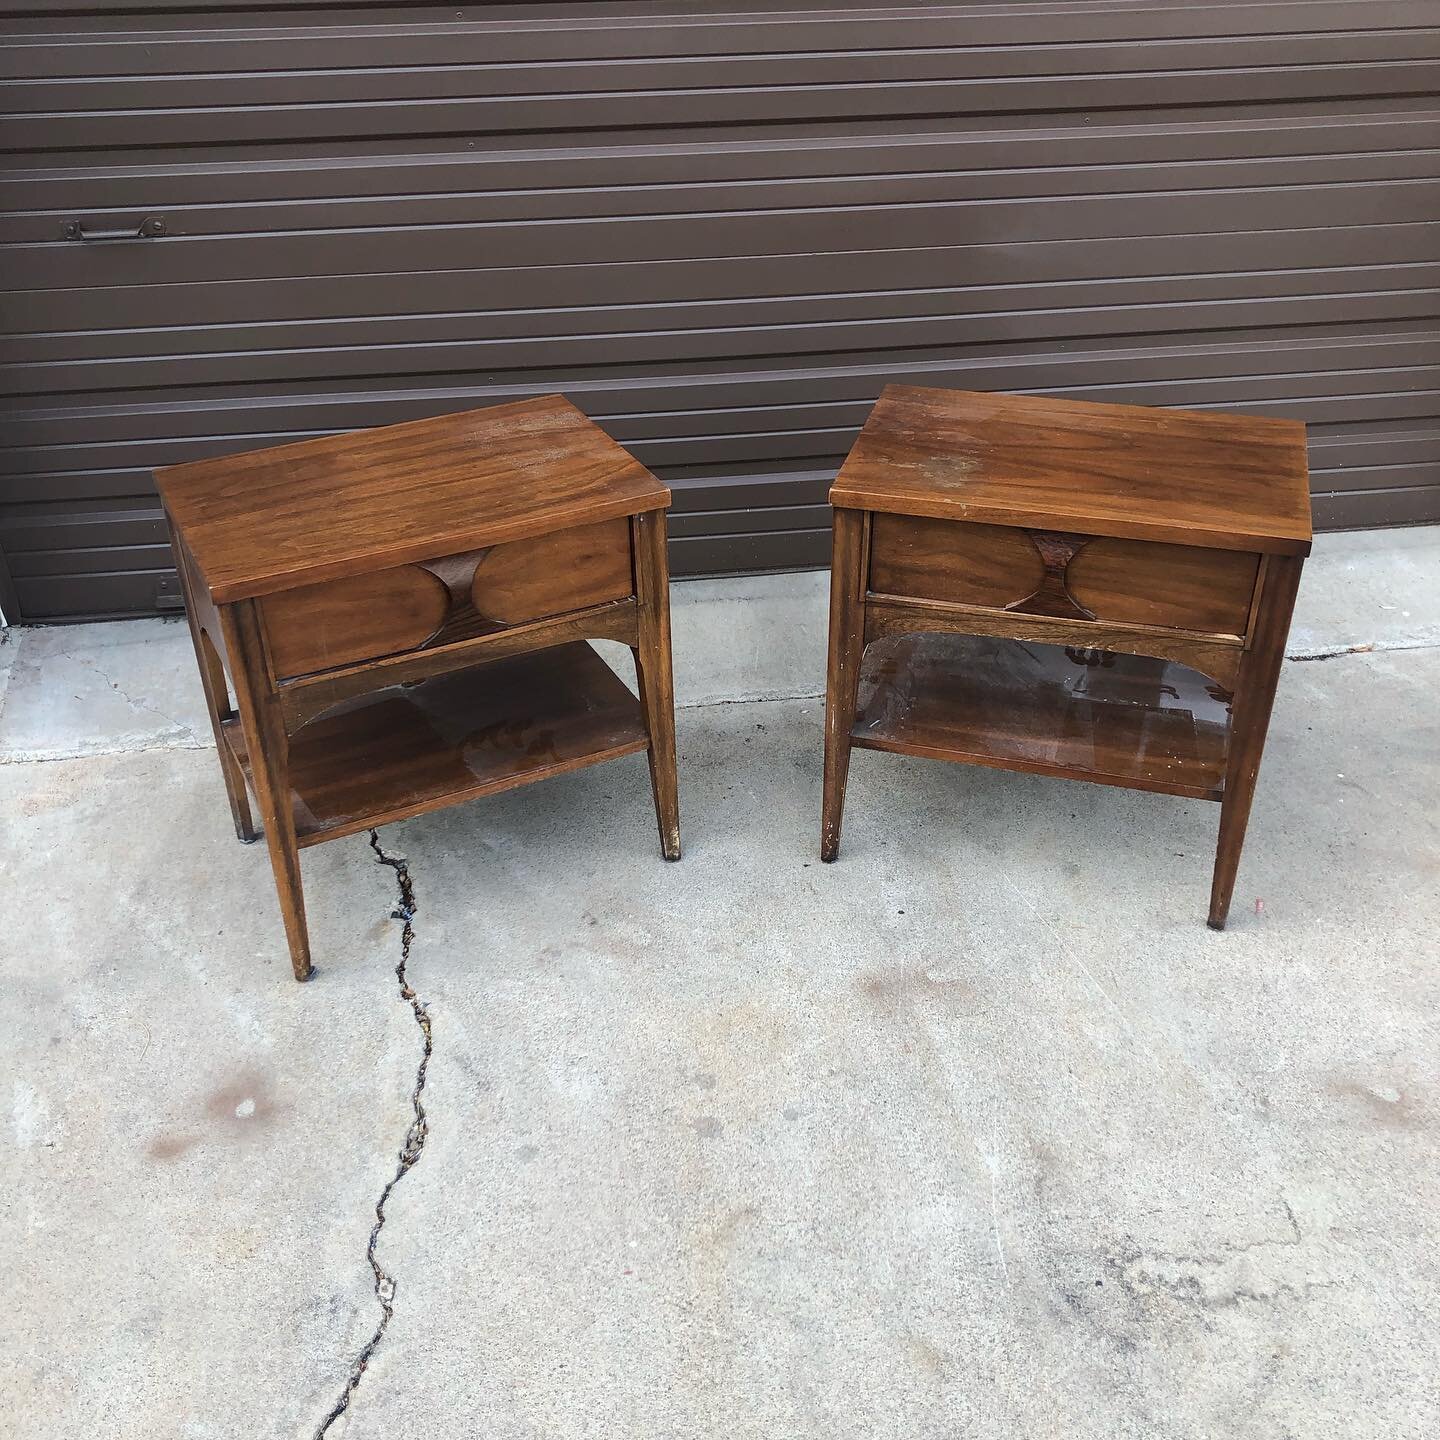 Very hard to find pair of Kent Coffey night stands. This is how I got them. They can be sold as is or we can clean them up. As is $675 pair. Rosewood handles. Great deal. DM for more info.